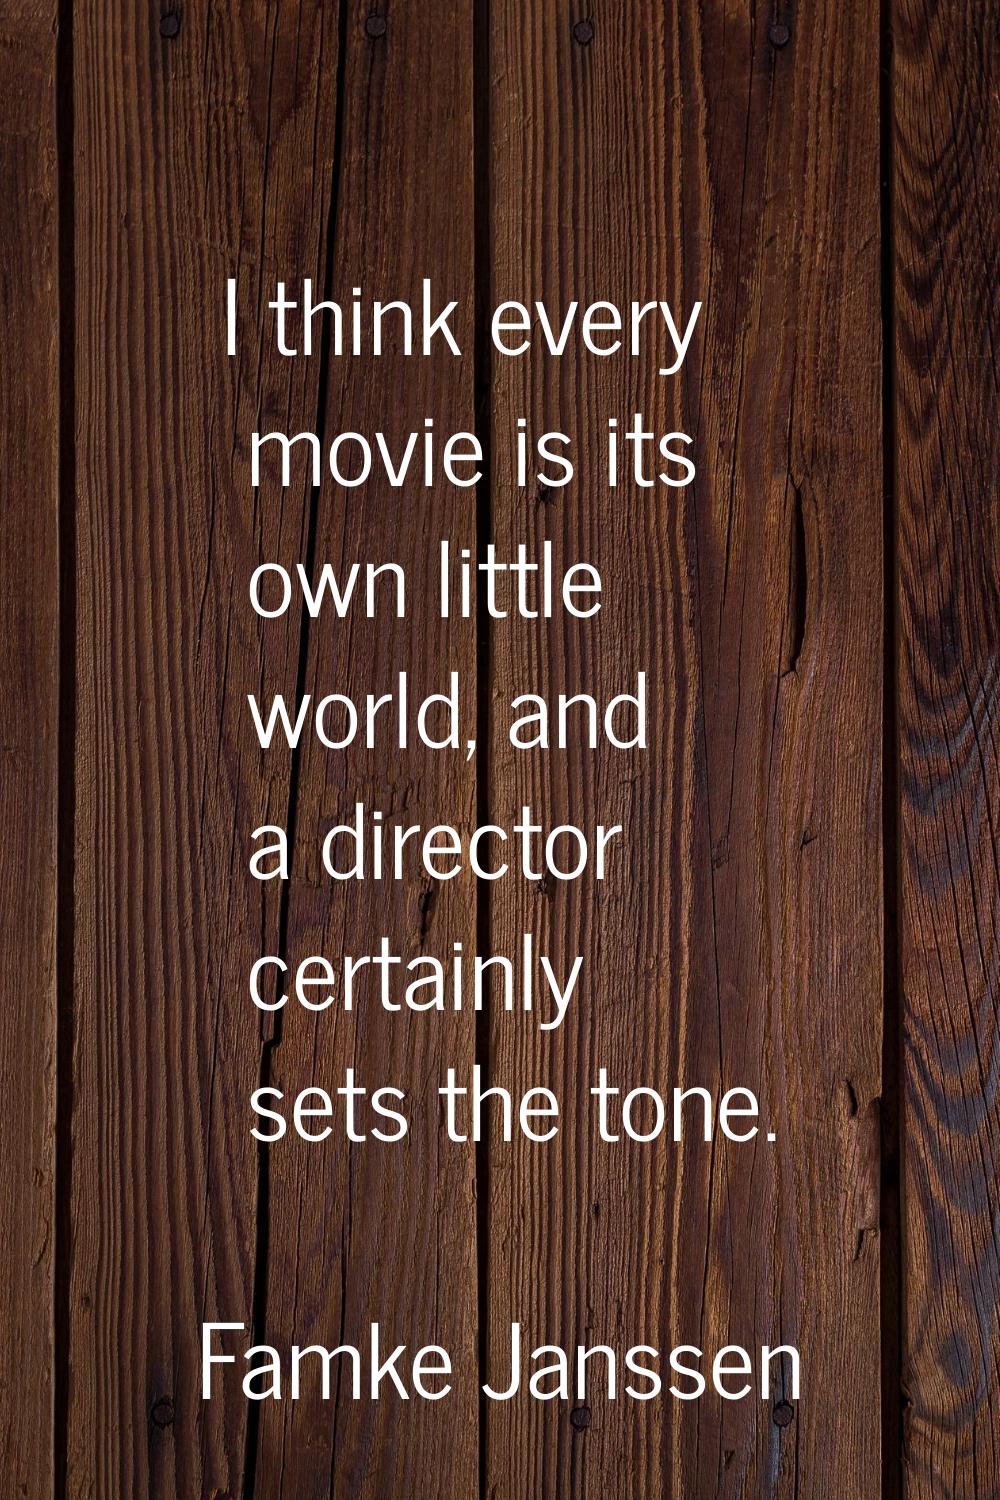 I think every movie is its own little world, and a director certainly sets the tone.